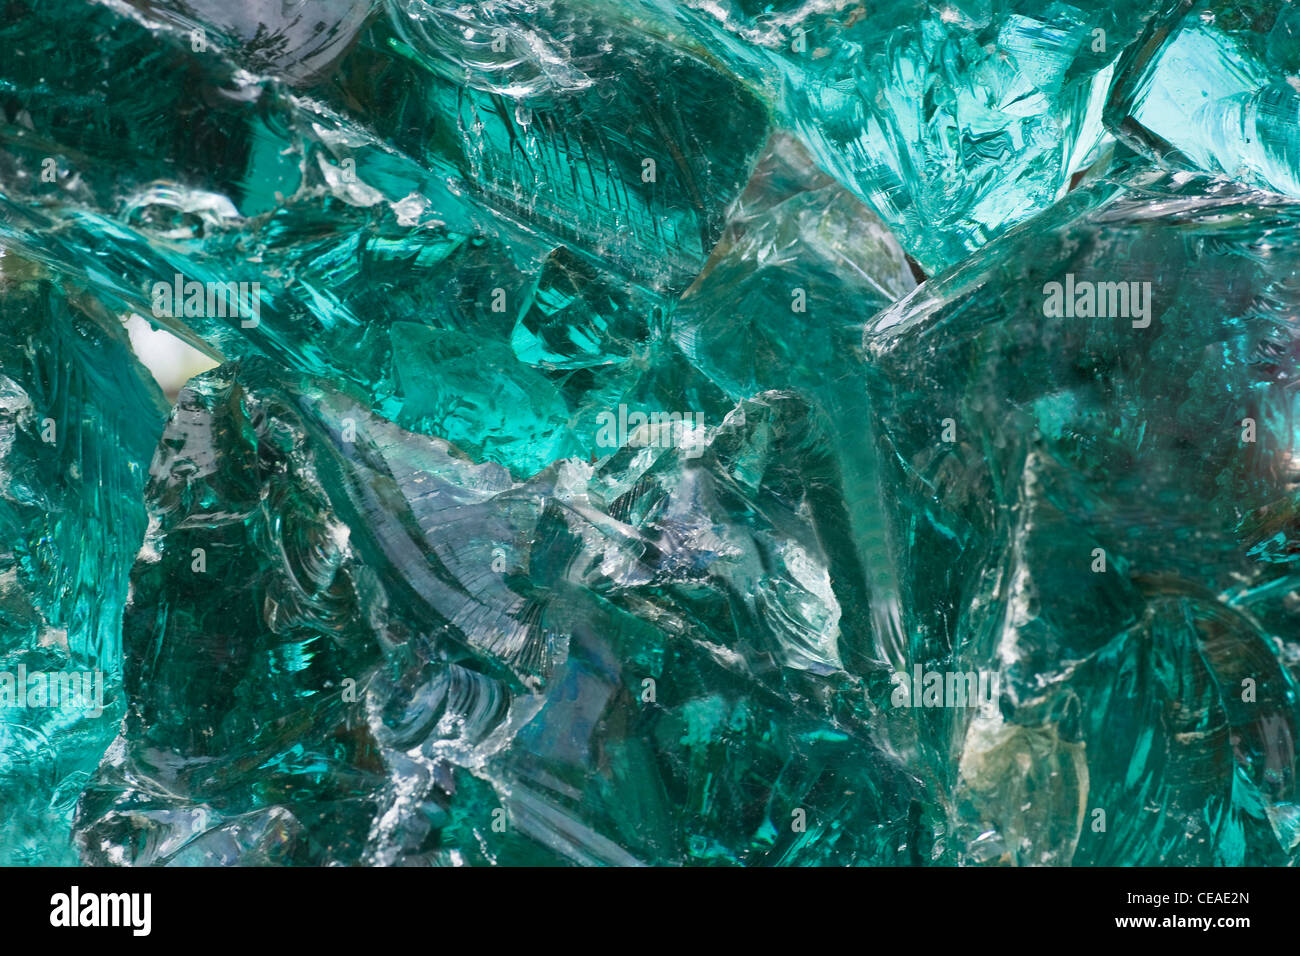 Part of big piece of green glass with light reflection - horizontal image Stock Photo